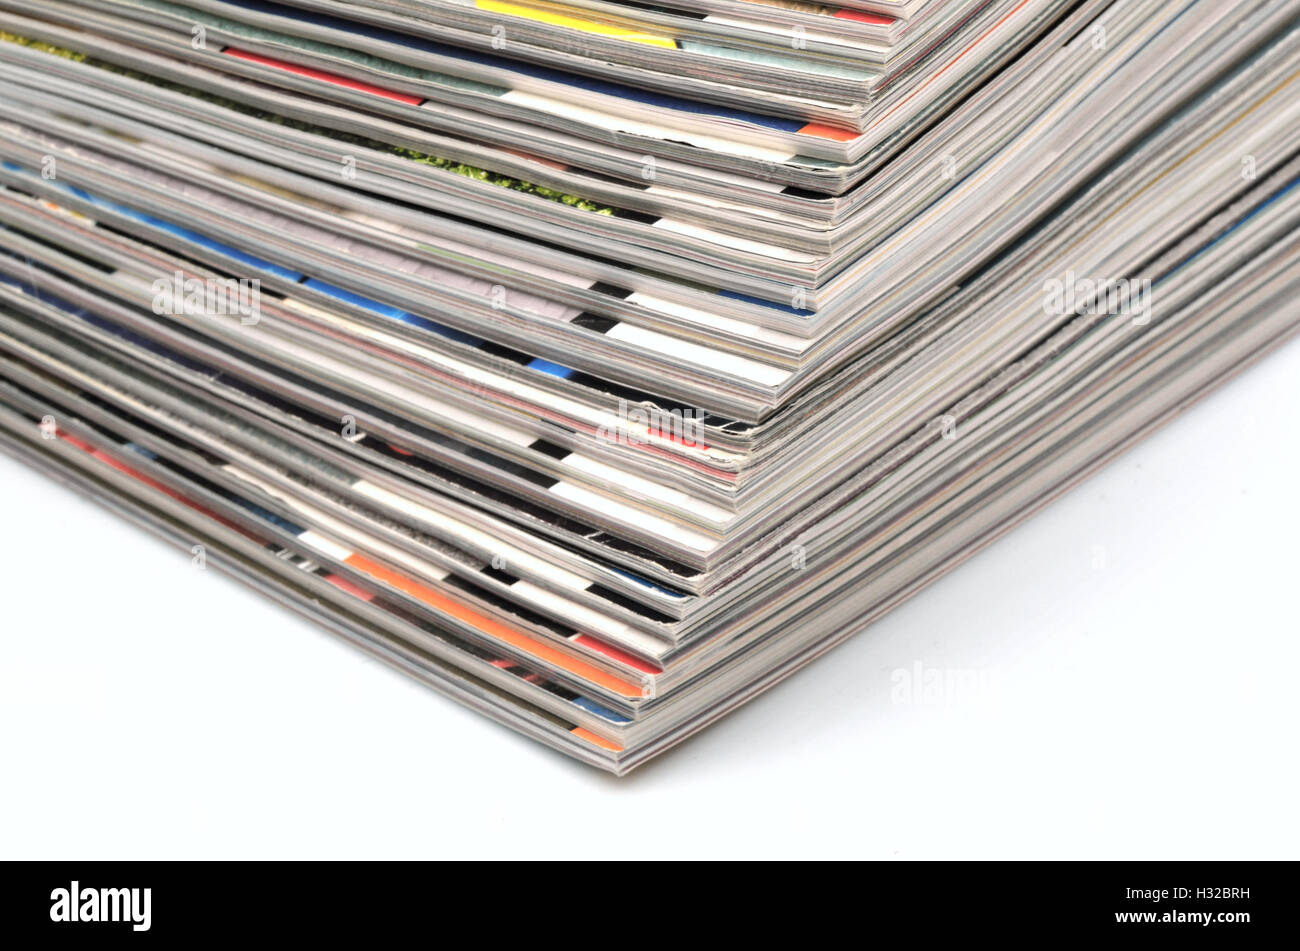 Stack of old colored magazines on white background Stock Photo